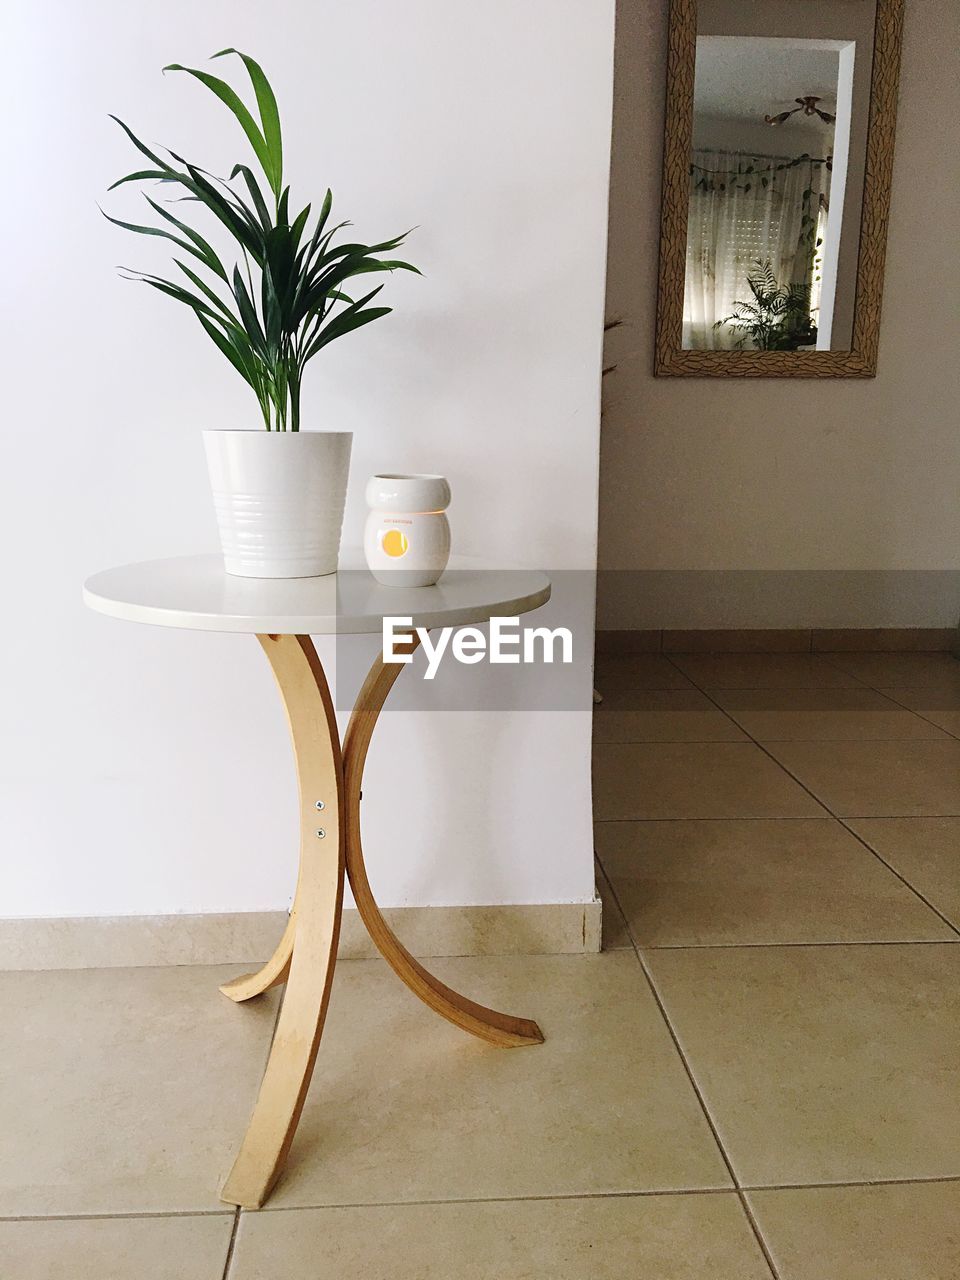 Potted plant with container on table